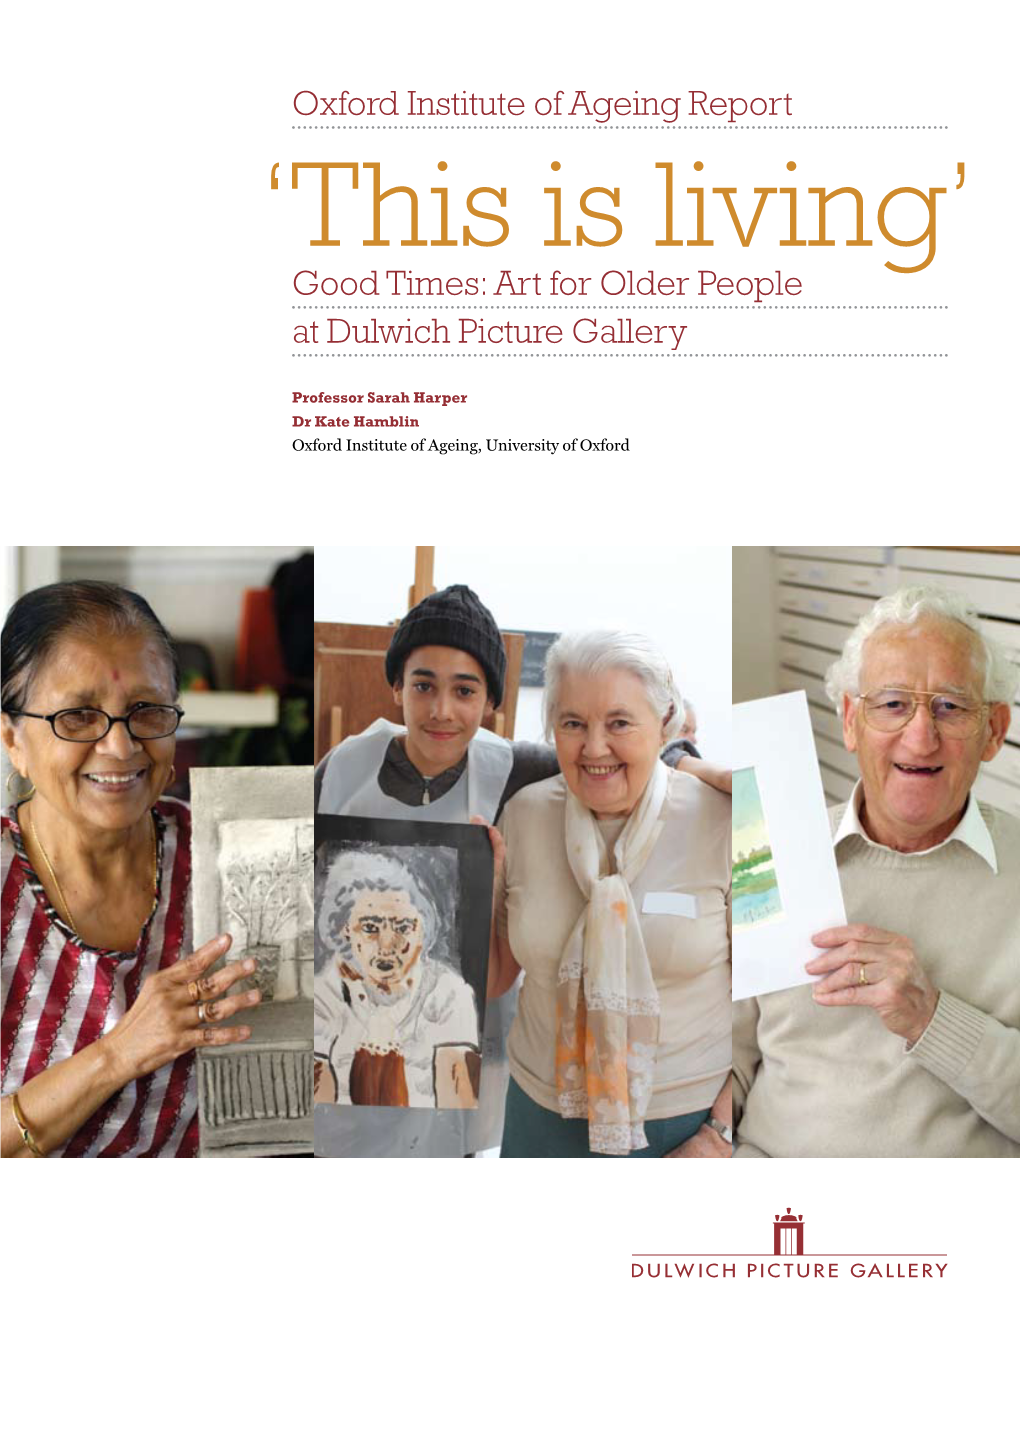 Oxford Institute of Ageing Report Good Times: Art for Older People at Dulwich Picture Gallery